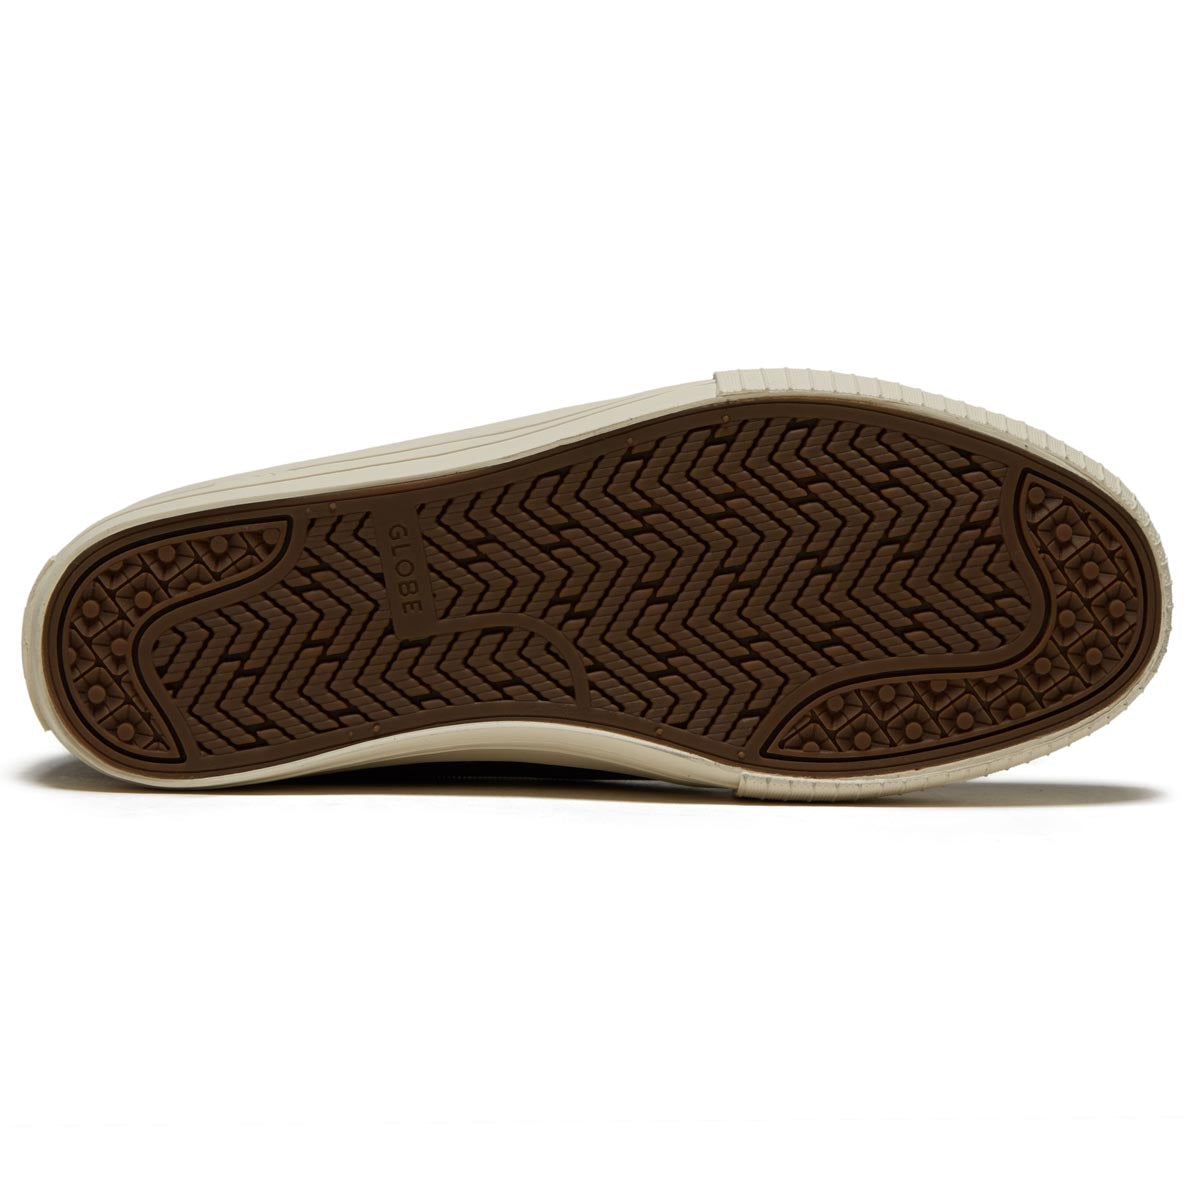 Globe Gillette Mid Shoes - Ink Corded Suede image 4